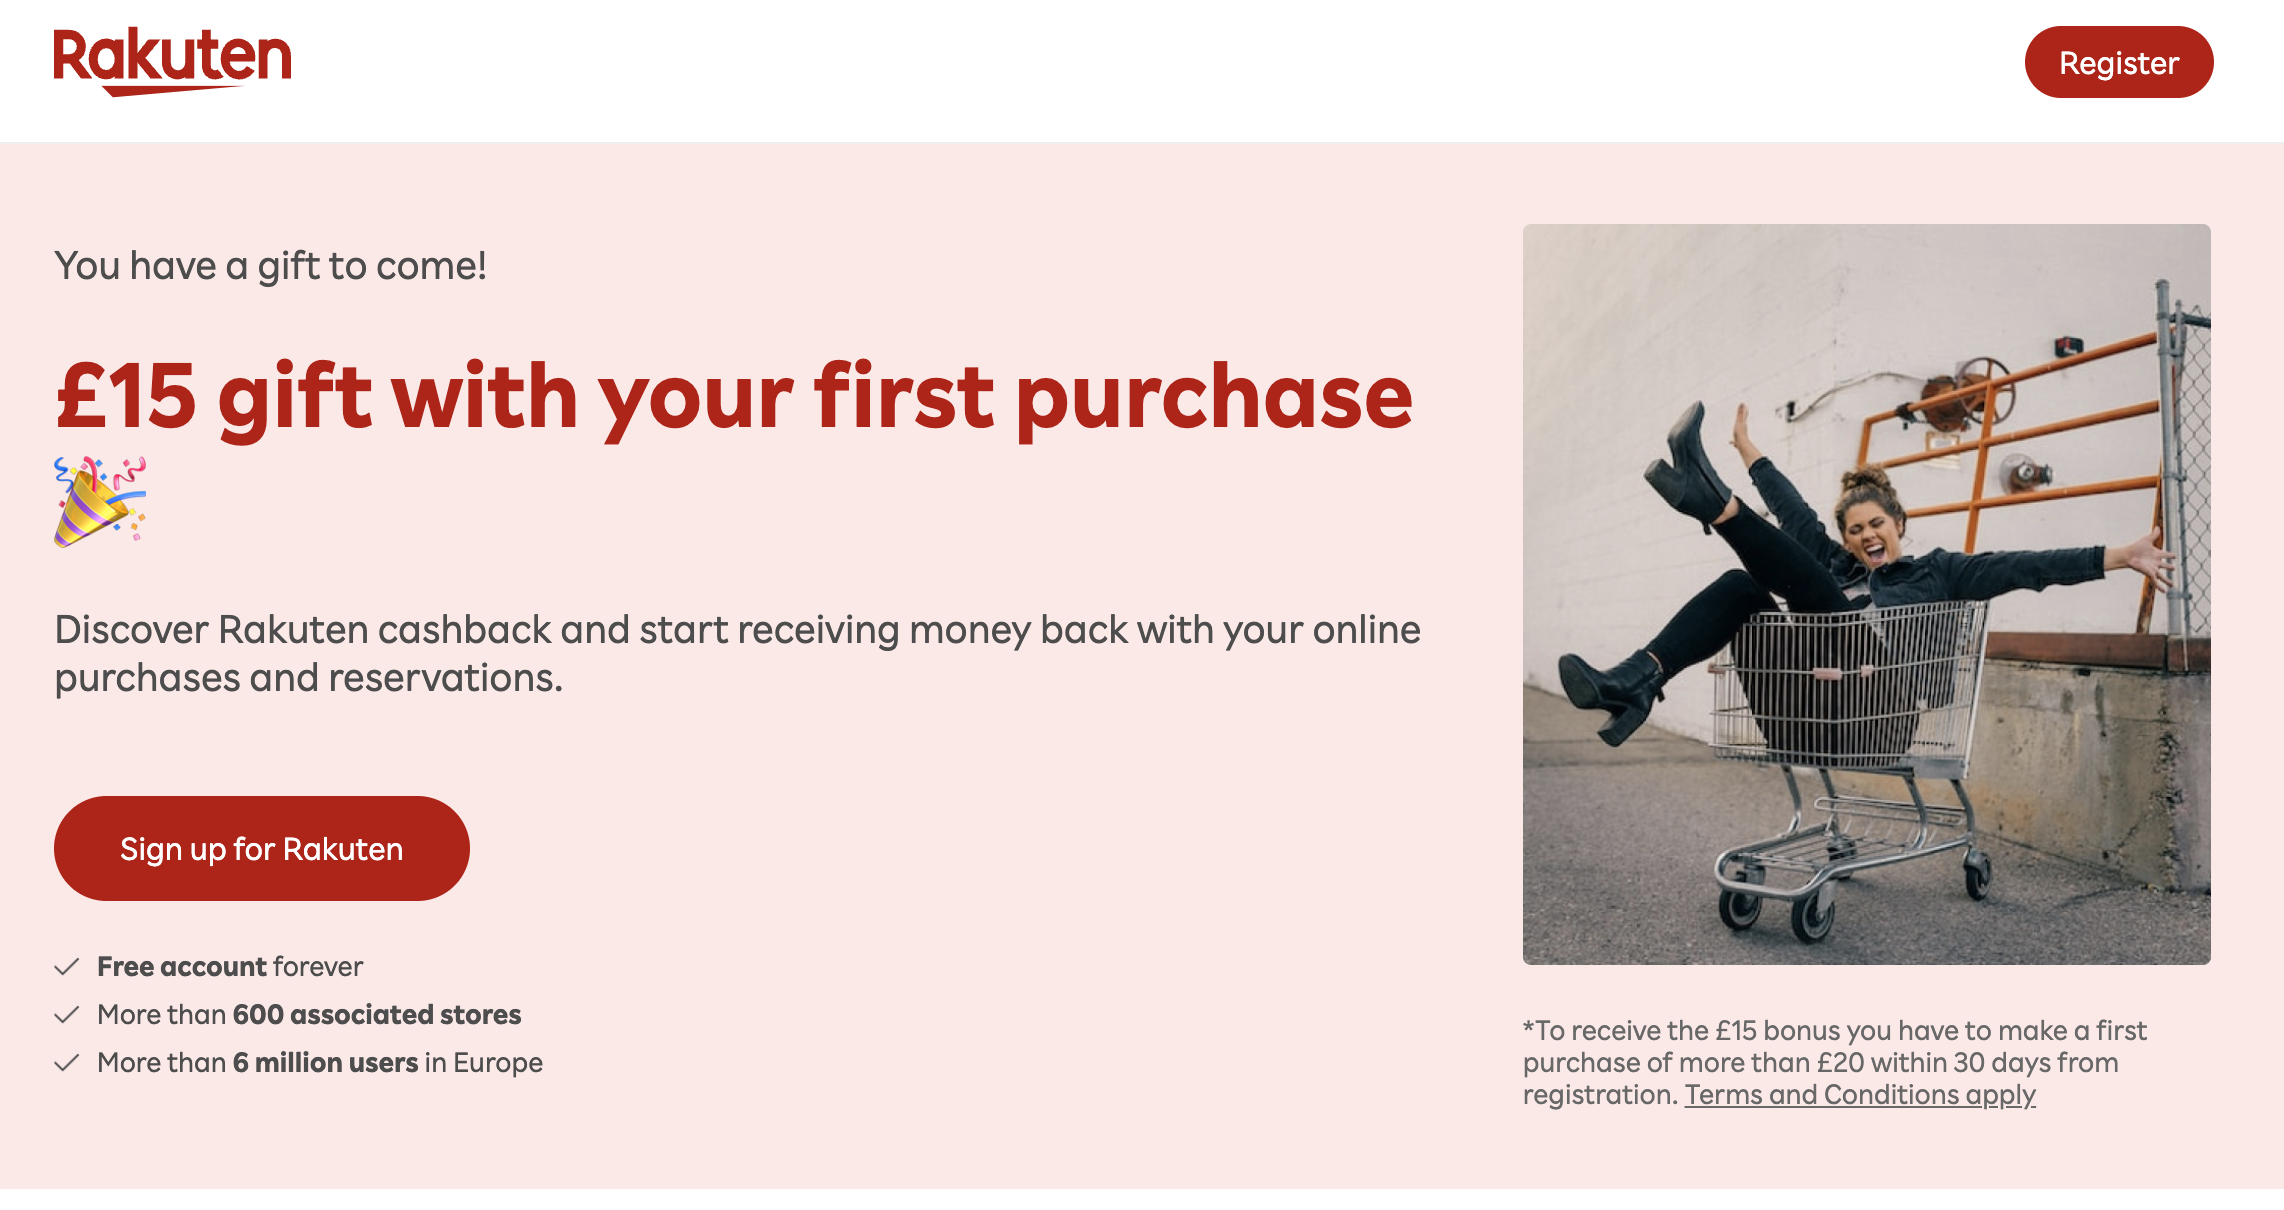 A screenshot of the Rakuten landing page offering a £15 free money with your initial purchase in the UK.